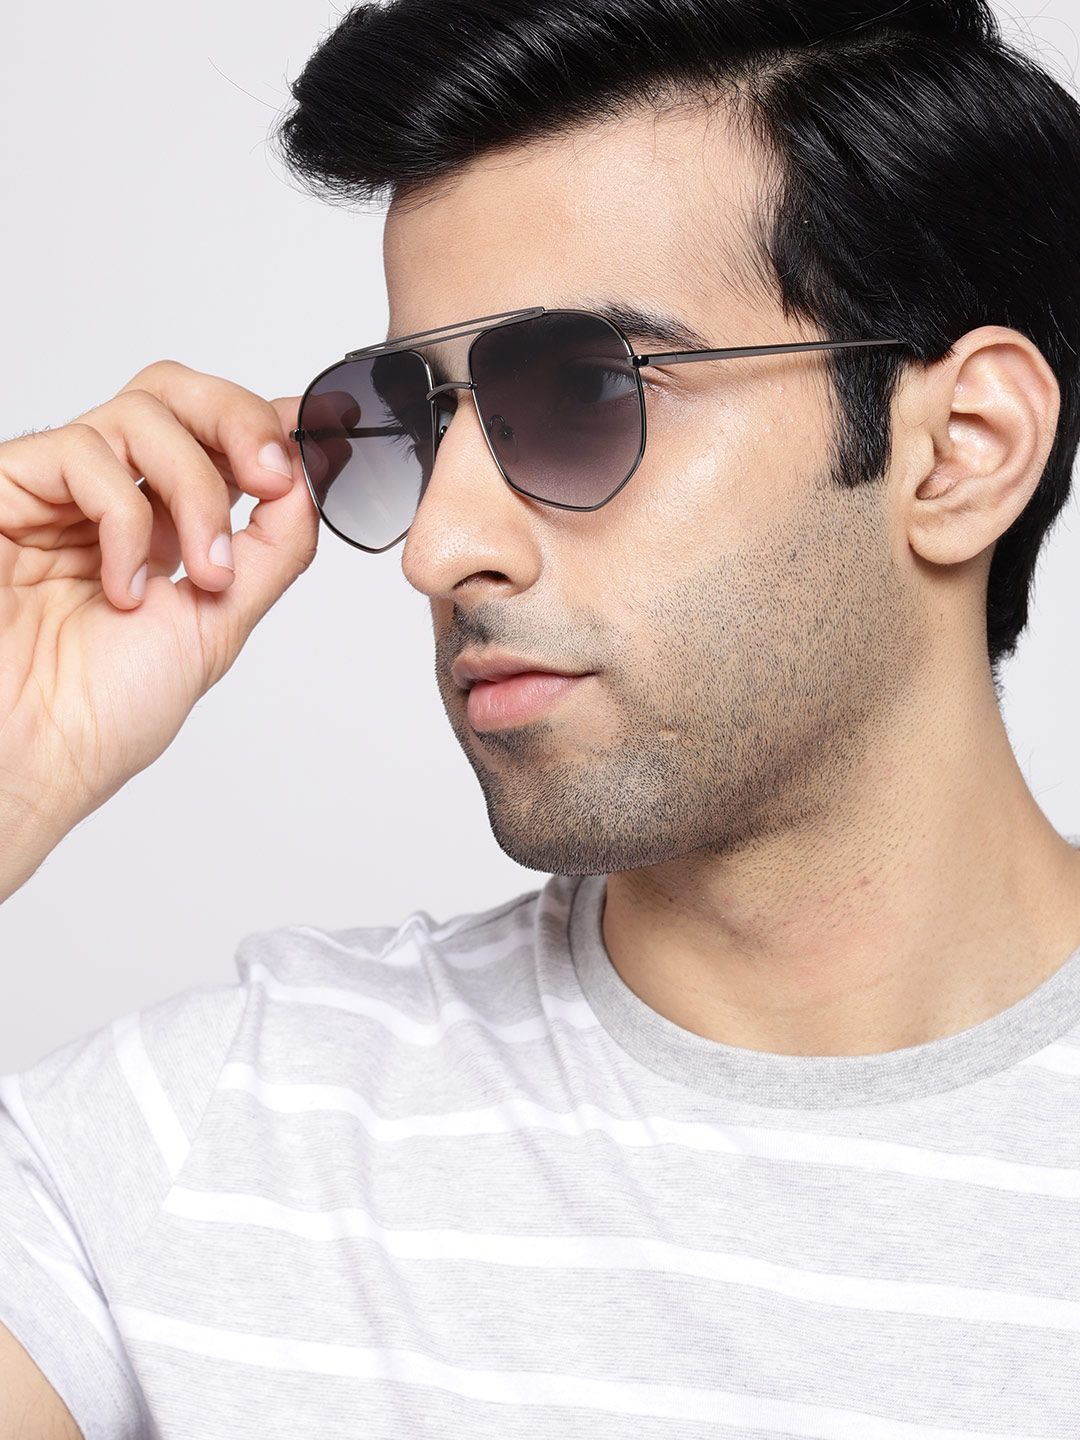 The Roadster Lifestyle Co Unisex Square Sunglasses MFB-PN-PS-T10273 Price in India